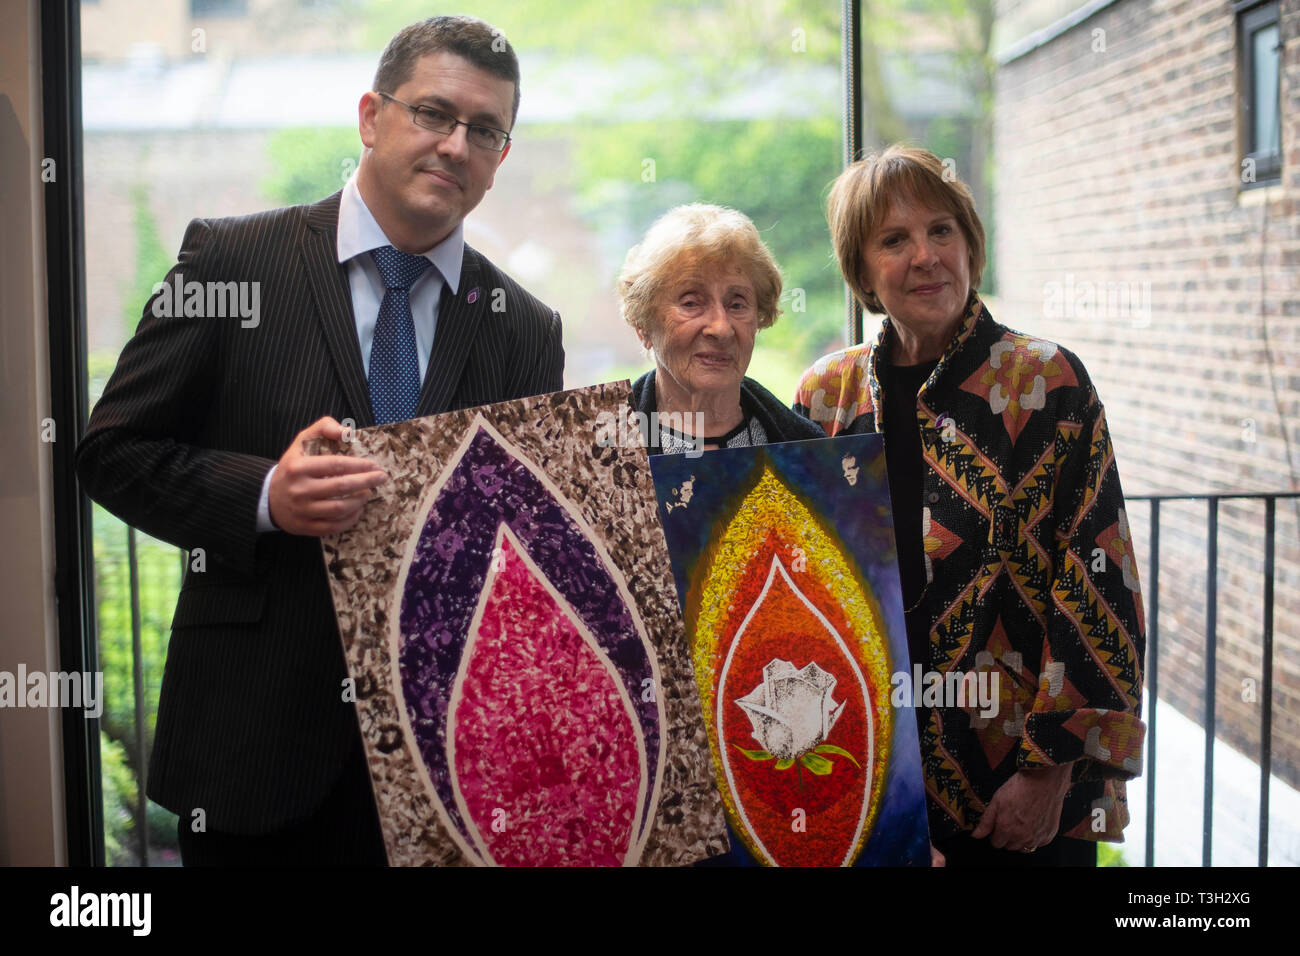 (left to right) Safet Vukalic, survivor of the Genocide in Bosnia, and Susan Pollack, survivor of Auschwitz, with Dame Penelope Wilton, during the launch for Holocaust Memorial Day 2020 in London, marking the 75th anniversary of the liberation of Auschwitz. Stock Photo